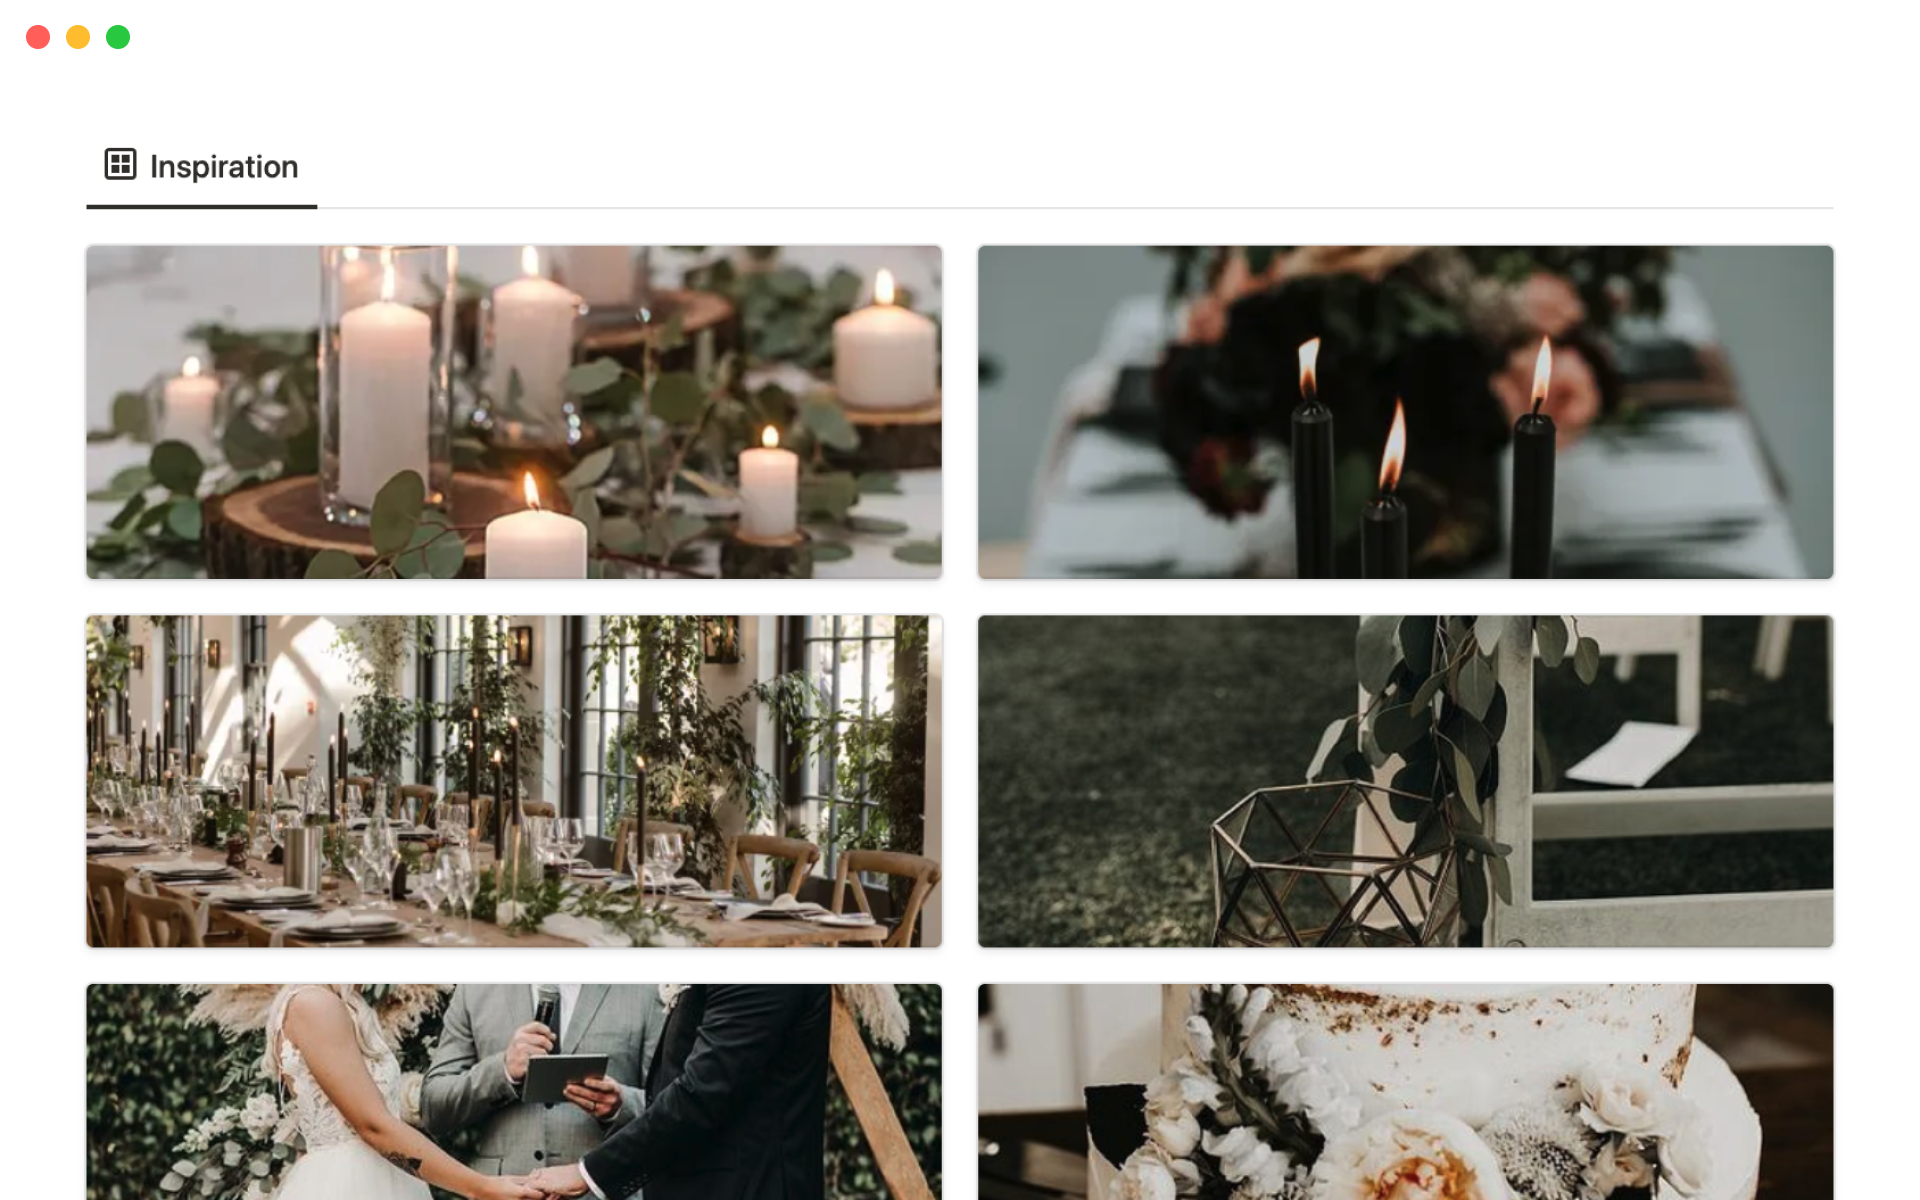 This template helps to plan and organize your wedding.